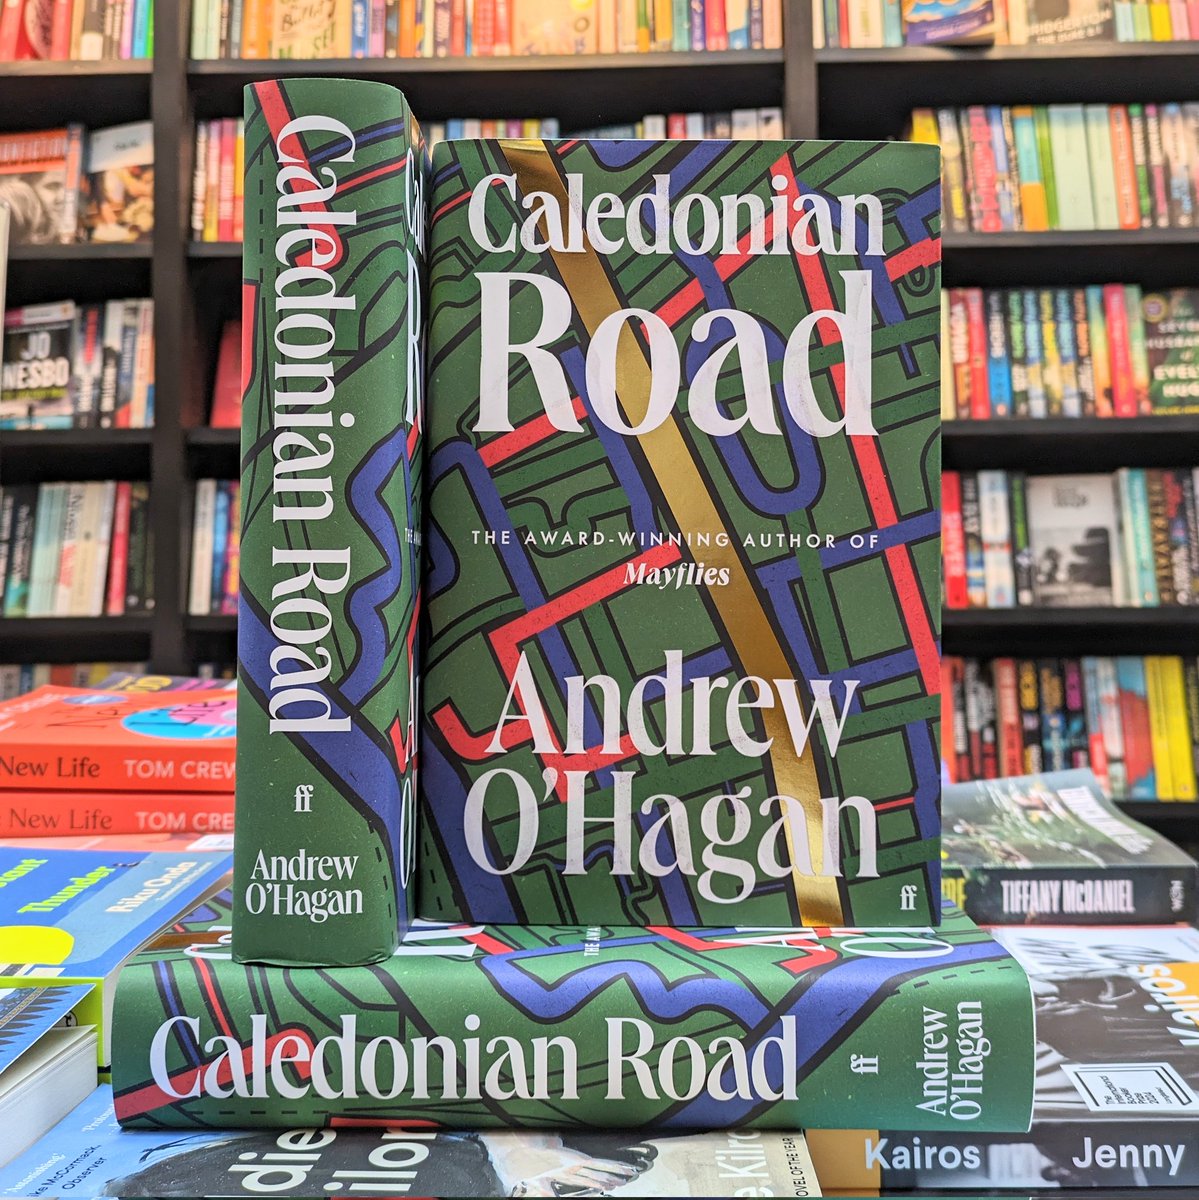 Brand new from the author of 'Mayflies' comes a searingly insightful state-of-the-nation novel. 'Caledonian Road' sees the worlds of a London professor and his provocative student collide in a gripping tale of power, privilege, and hypocrisy. #waterstones #caledonianroad